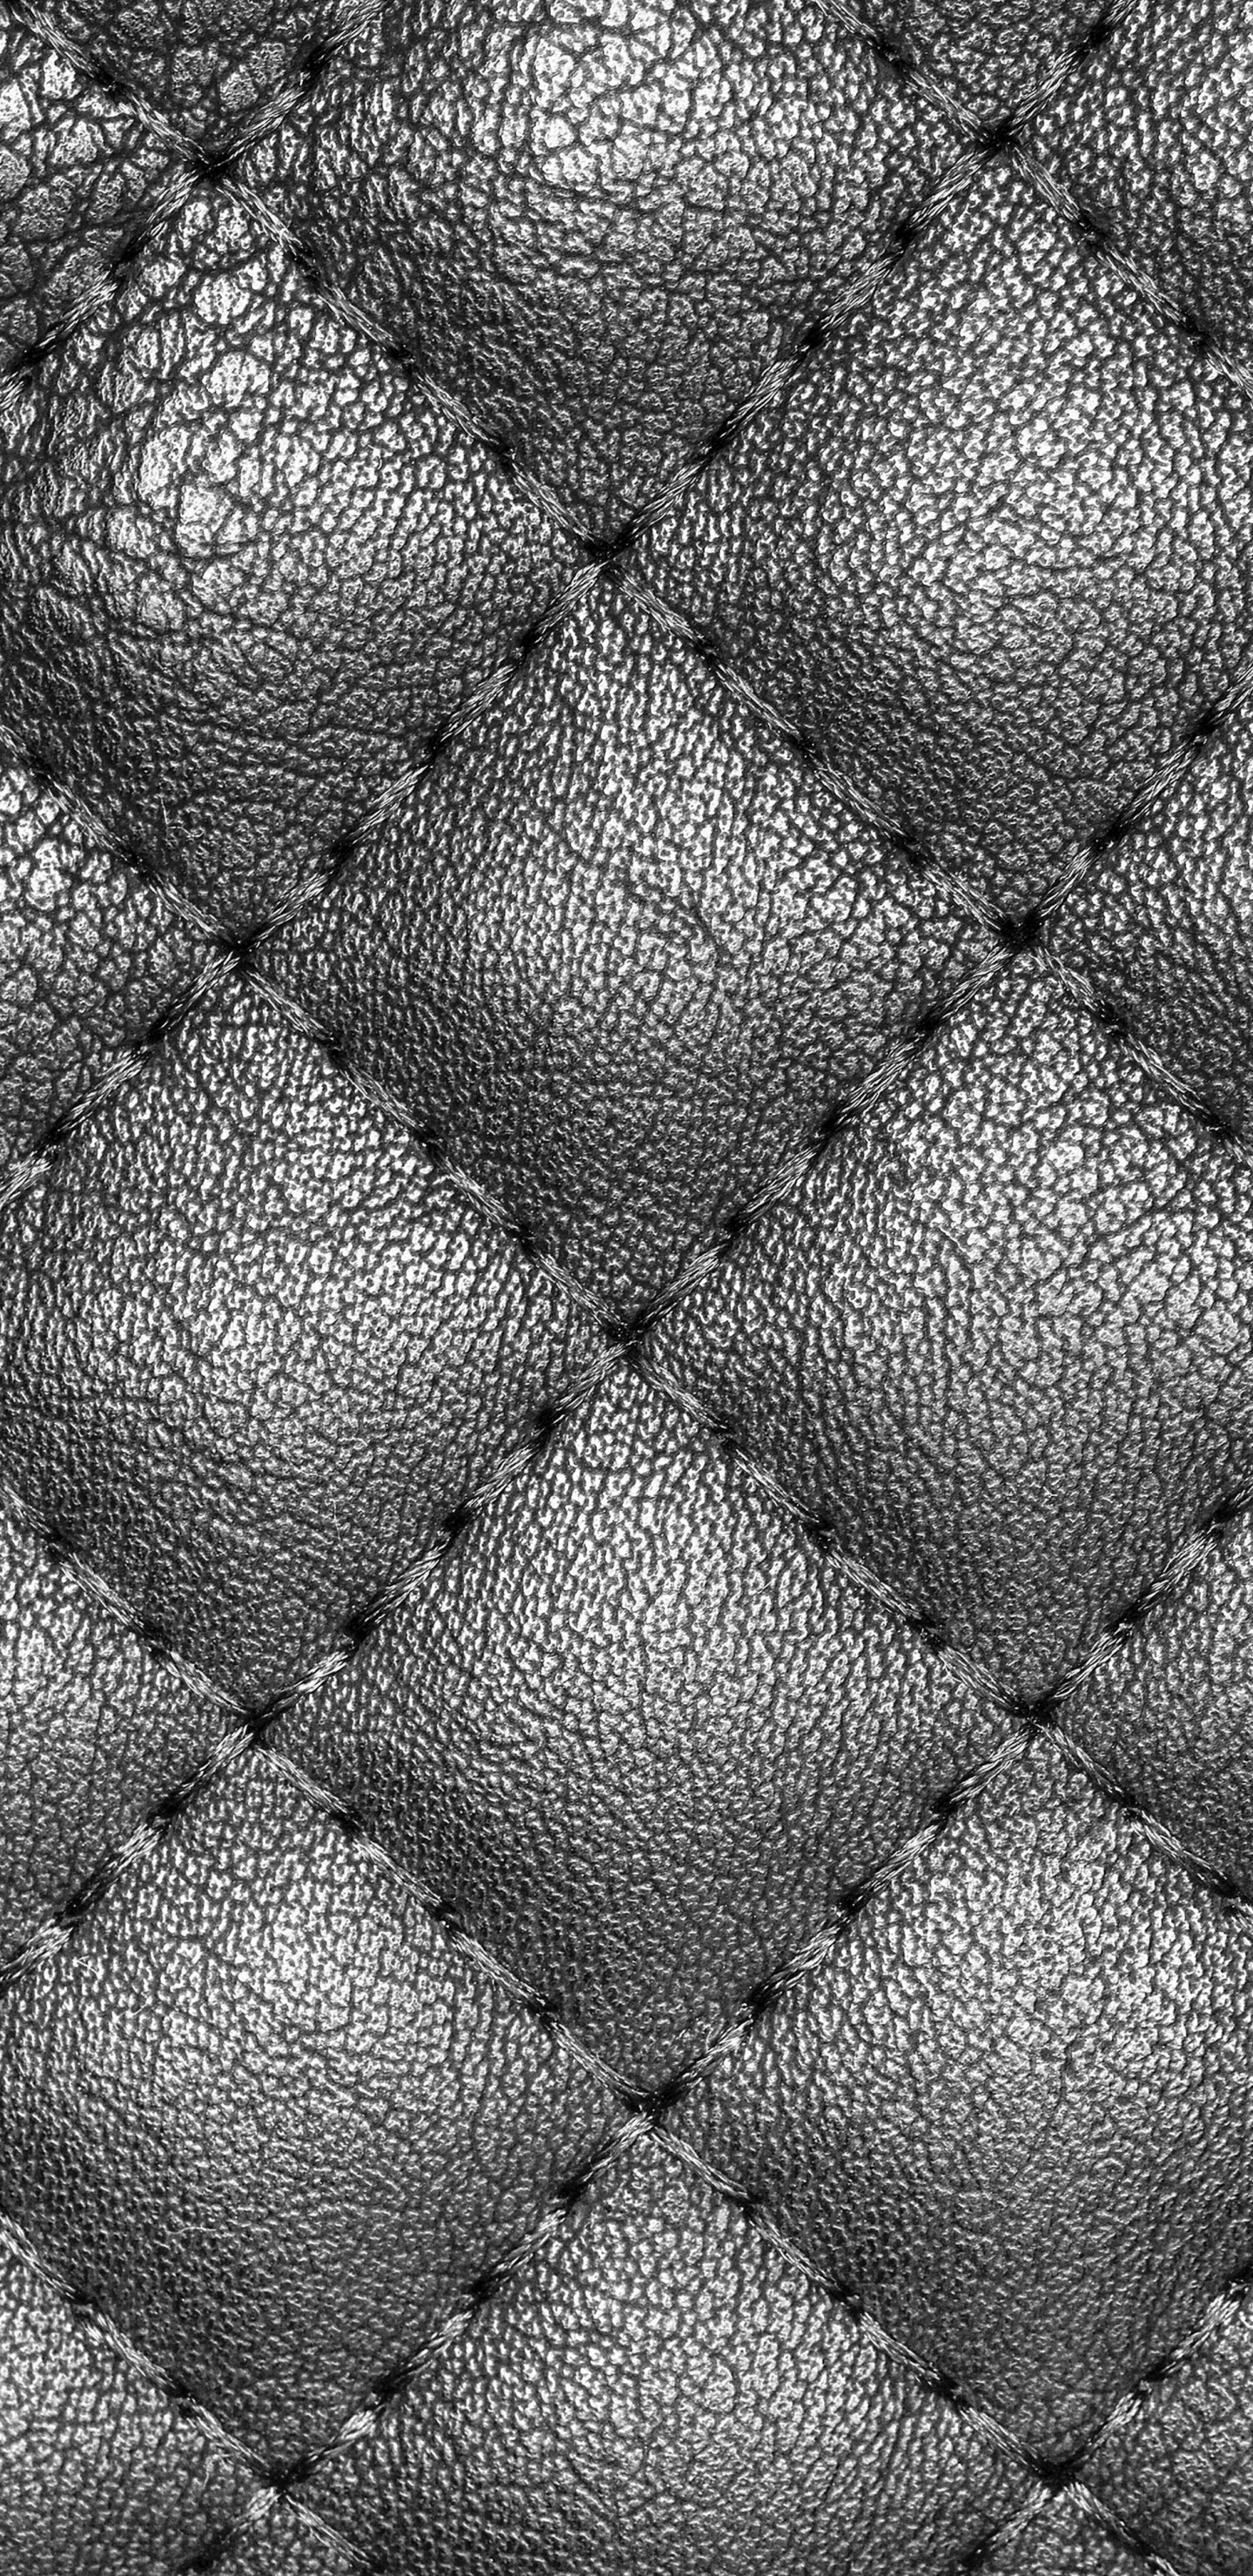 Grey and Black Knit Textile. Wallpaper in 1440x2960 Resolution